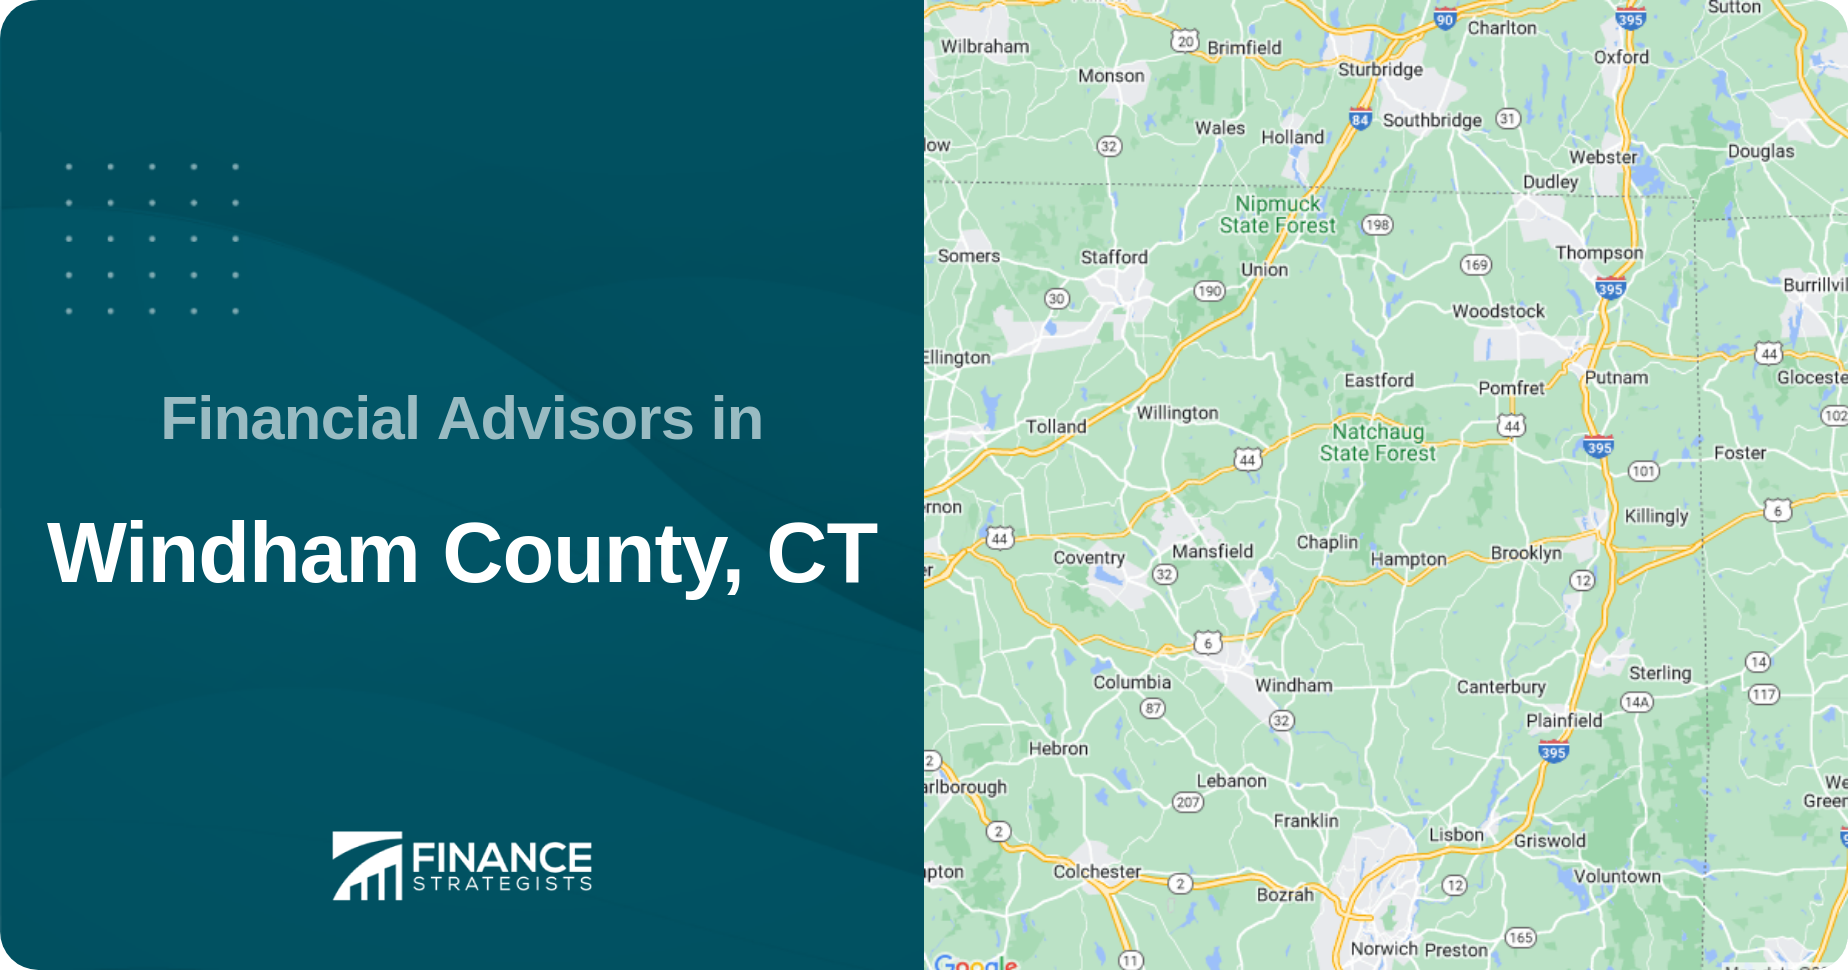 Financial Advisors in Windham County, CT